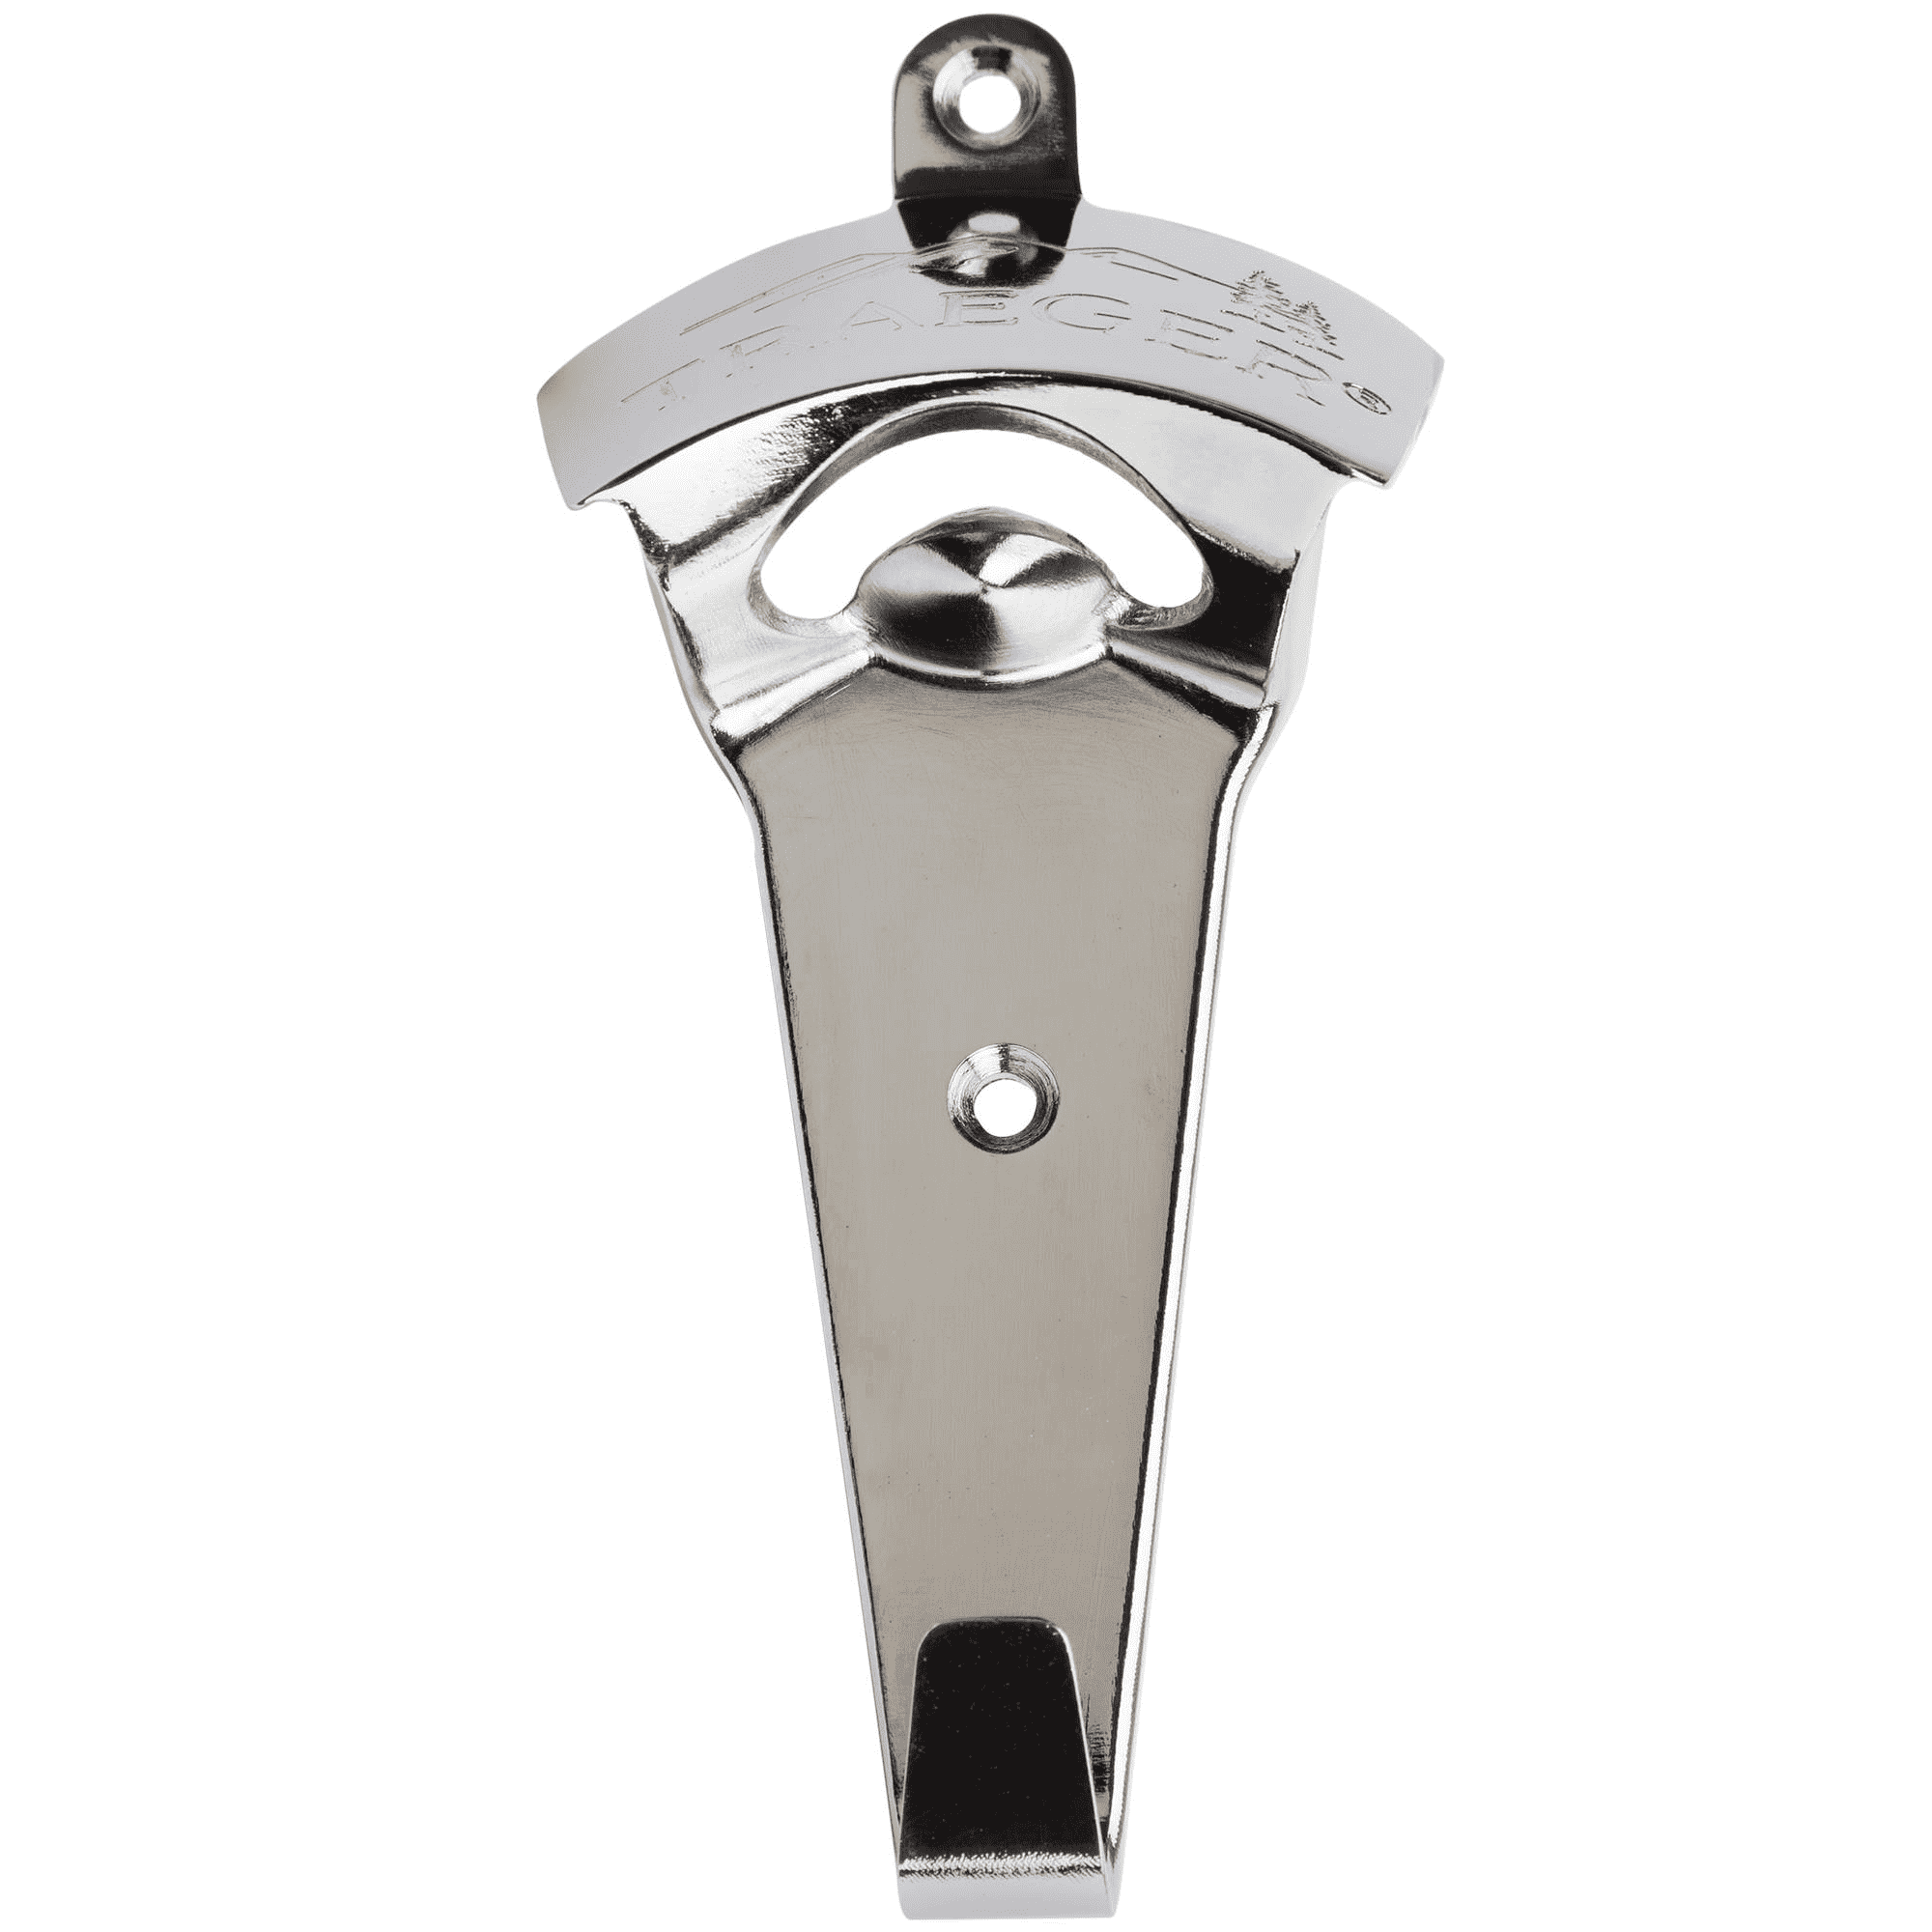 Waiter Steel Corkscrew PNG High Quality Image